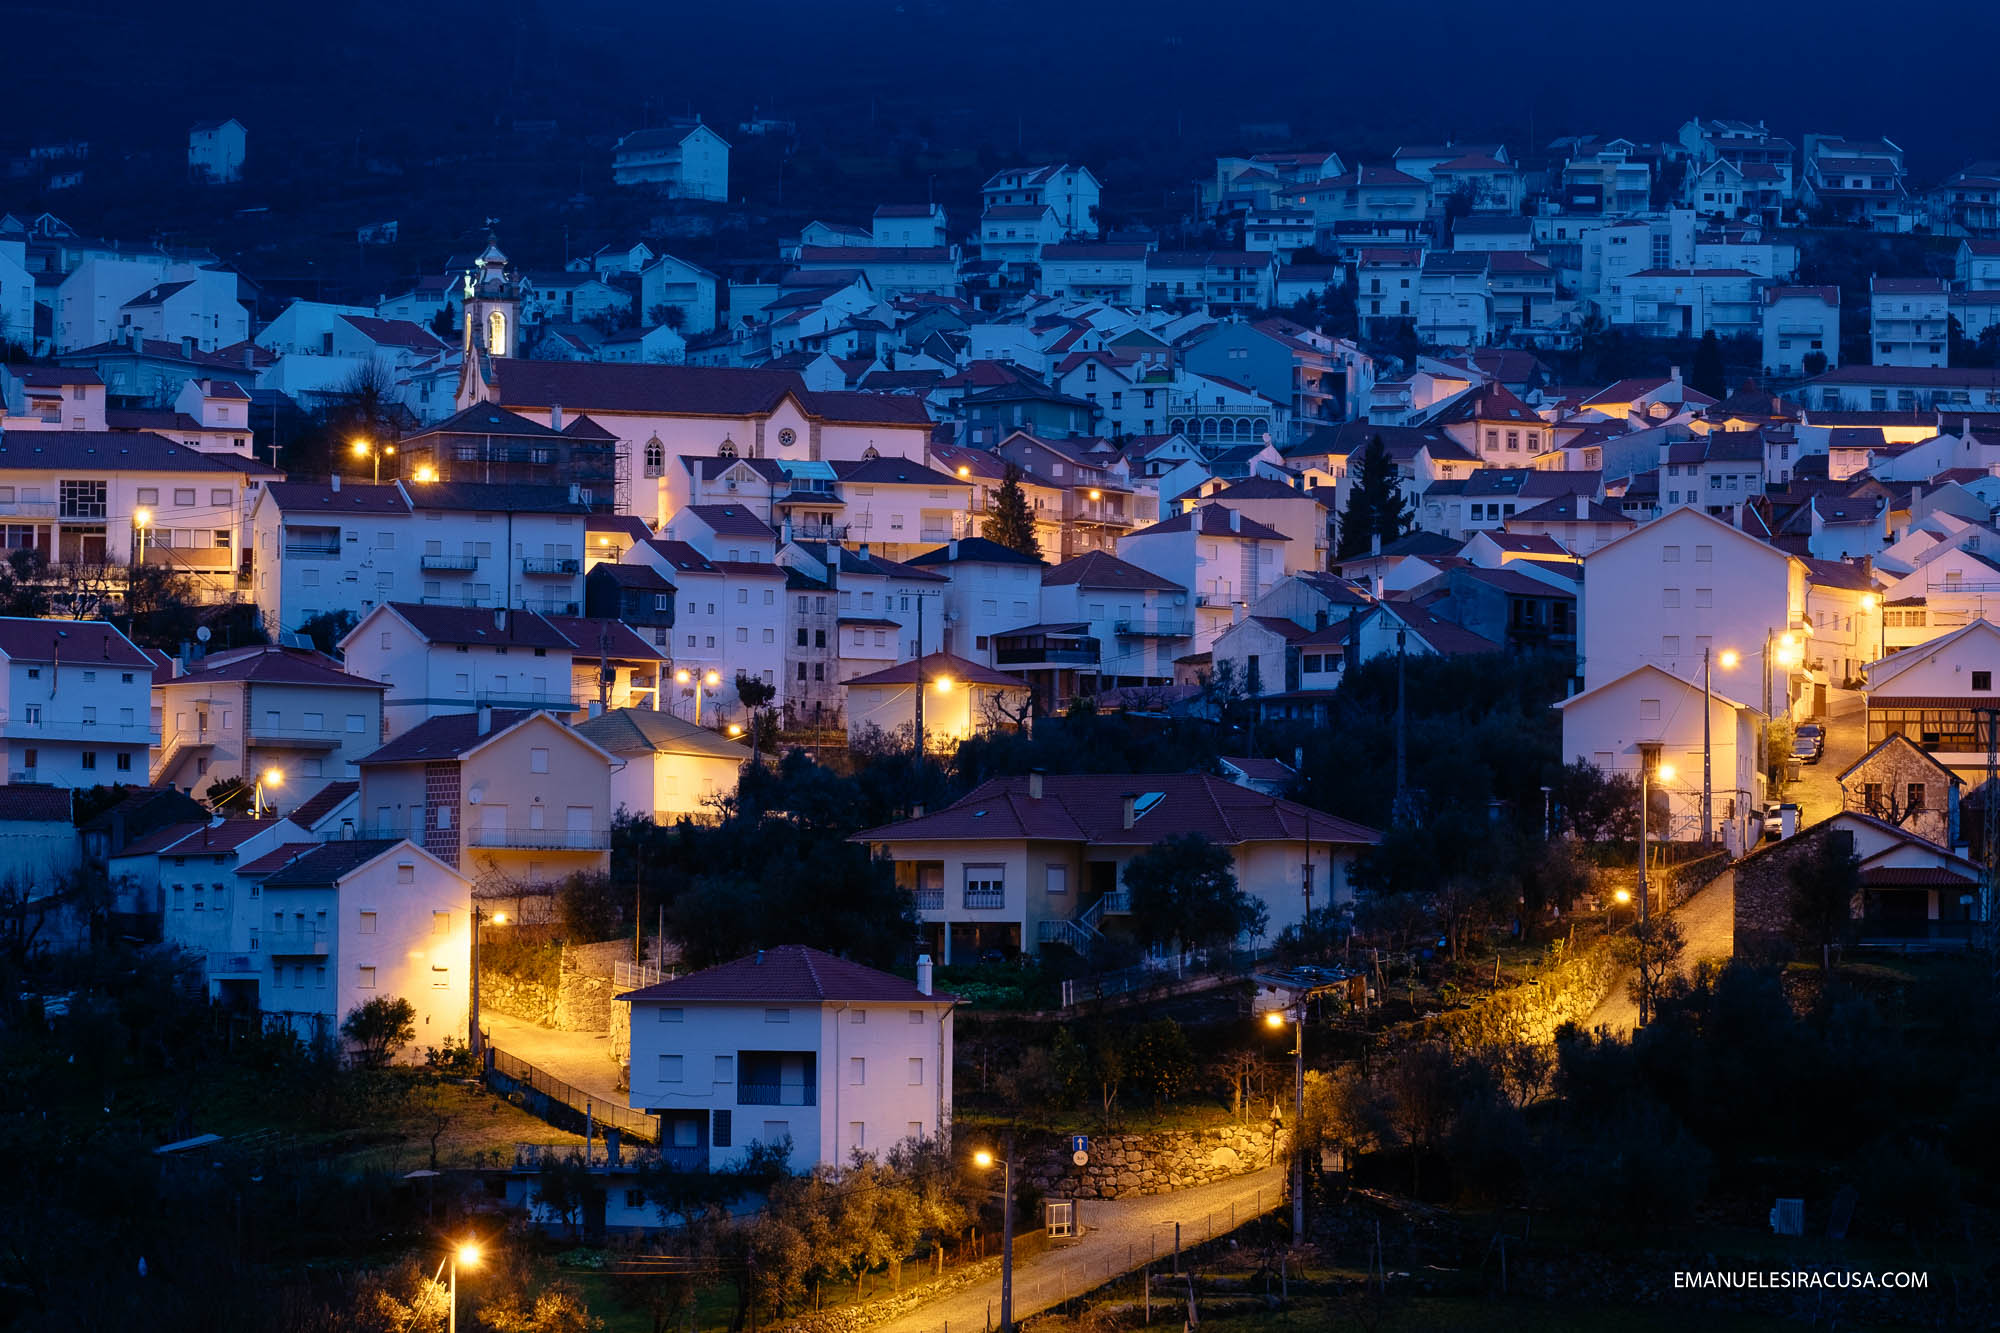 Manteigas before sunrise, as seen from the balcony of my hotel room. Located right in the hearth of the scenic Zezere river's Glacial Valley, and close to many hiking trails, Manteigas is the best gateway to Serra da Estrela.